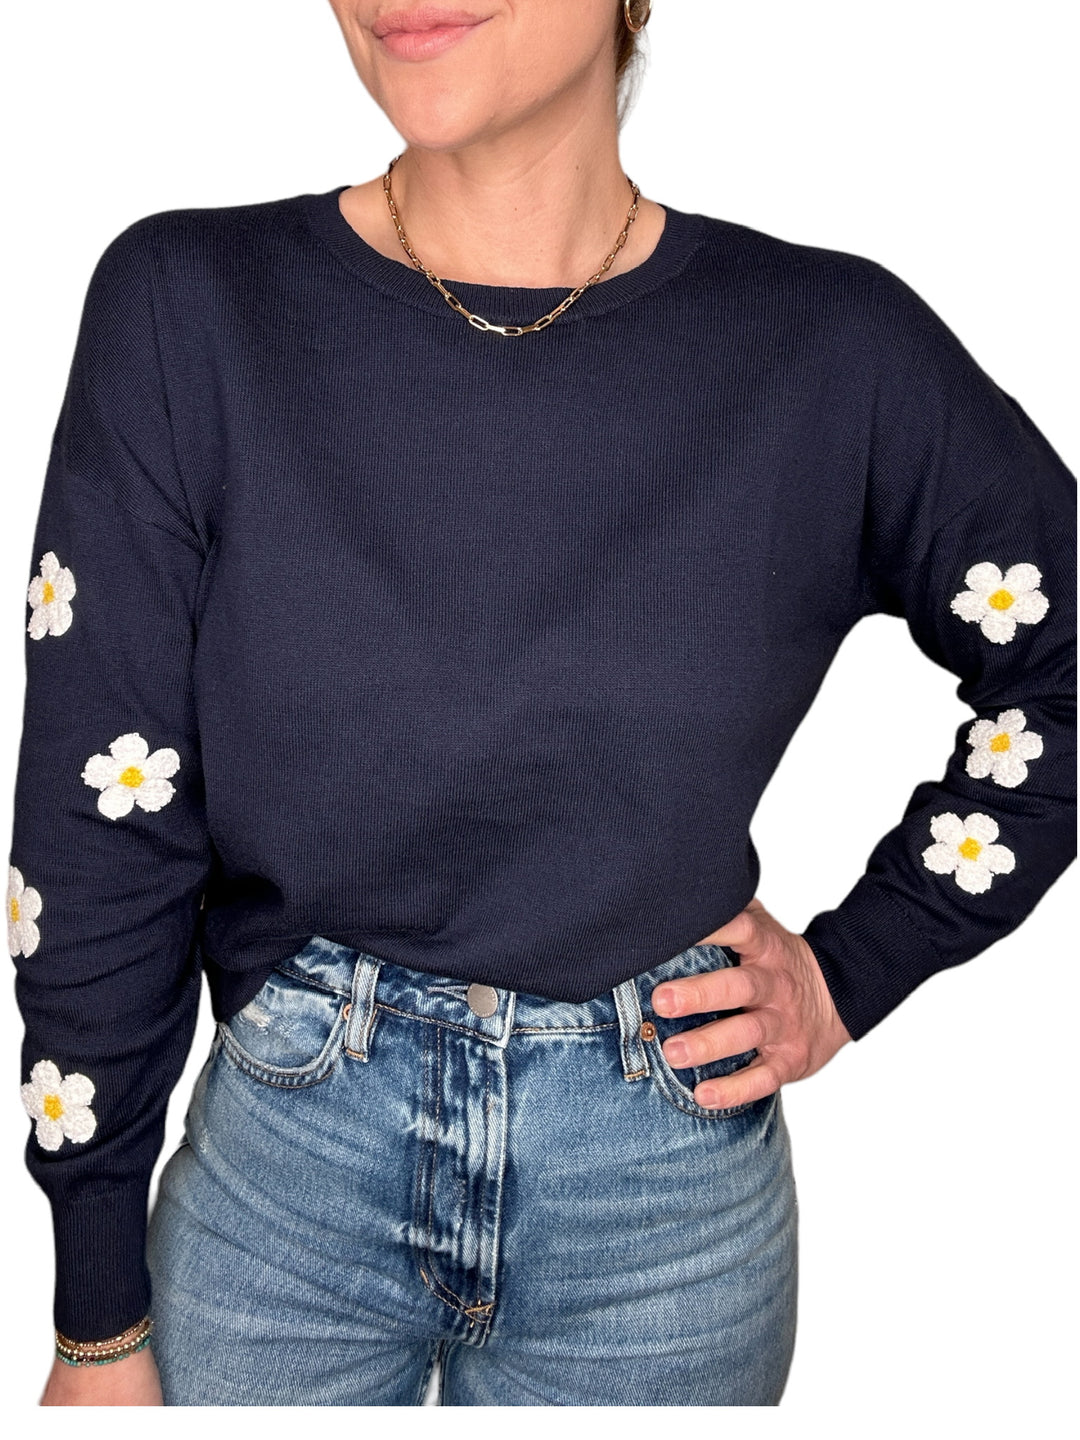 FLOWER SLEEVE SWEATER - NAVY - Kingfisher Road - Online Boutique